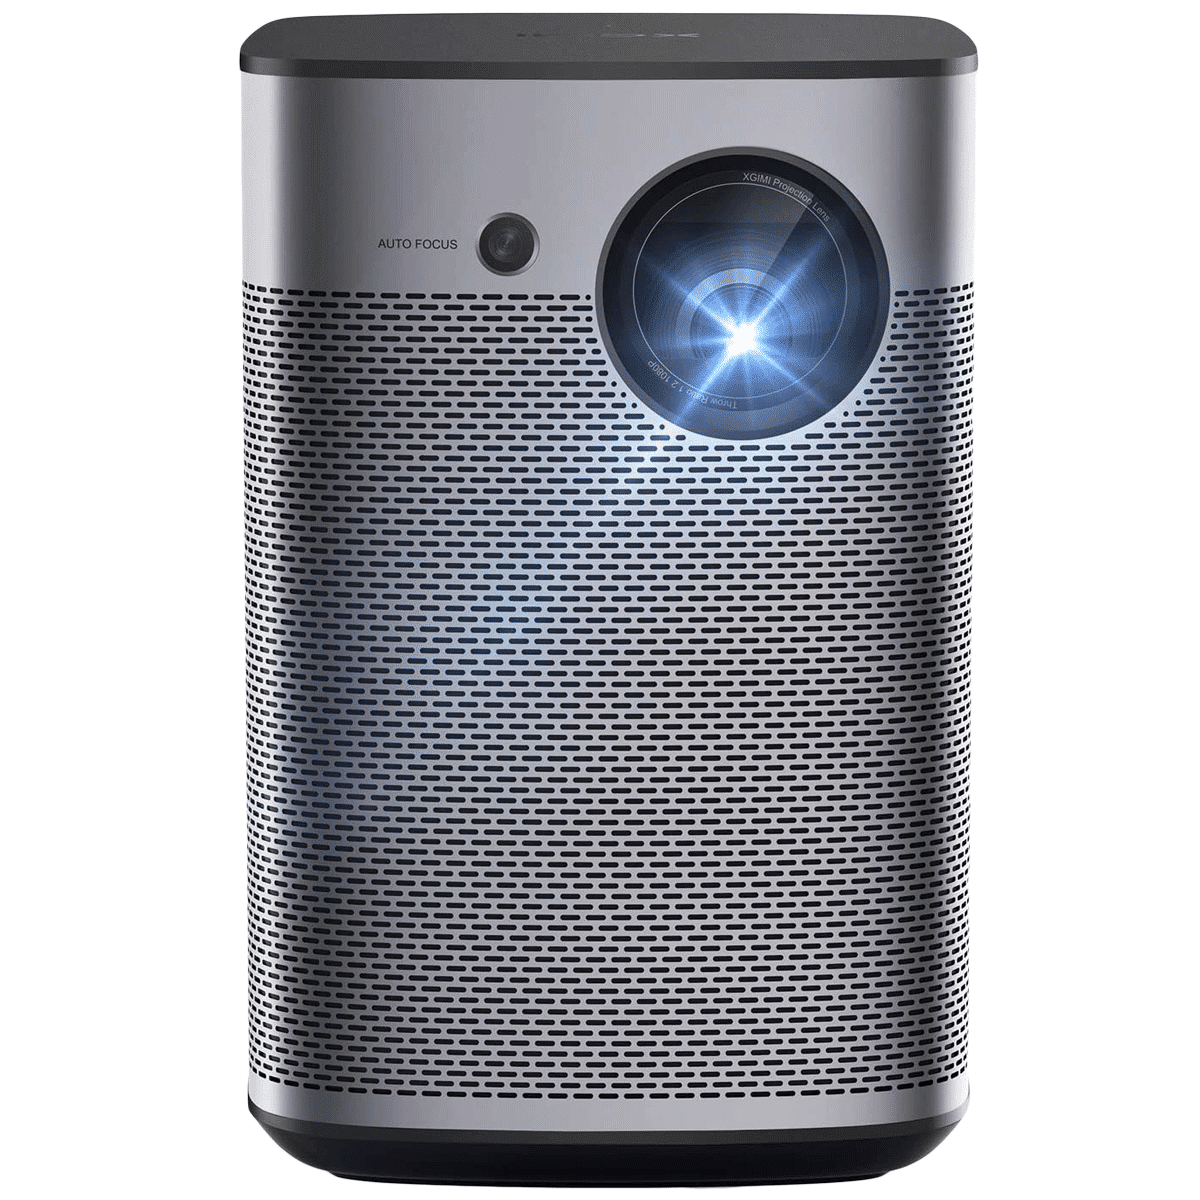 Lumens, Halo TV Online Android Projector XGIMI - Buy Smart with White Google Assistant, (DLP, Harman/Kardon Croma 800 9.0 Smart Aluminium) and + Speakers ANSI 1080p Portable Projector Indoor/Outdoor +